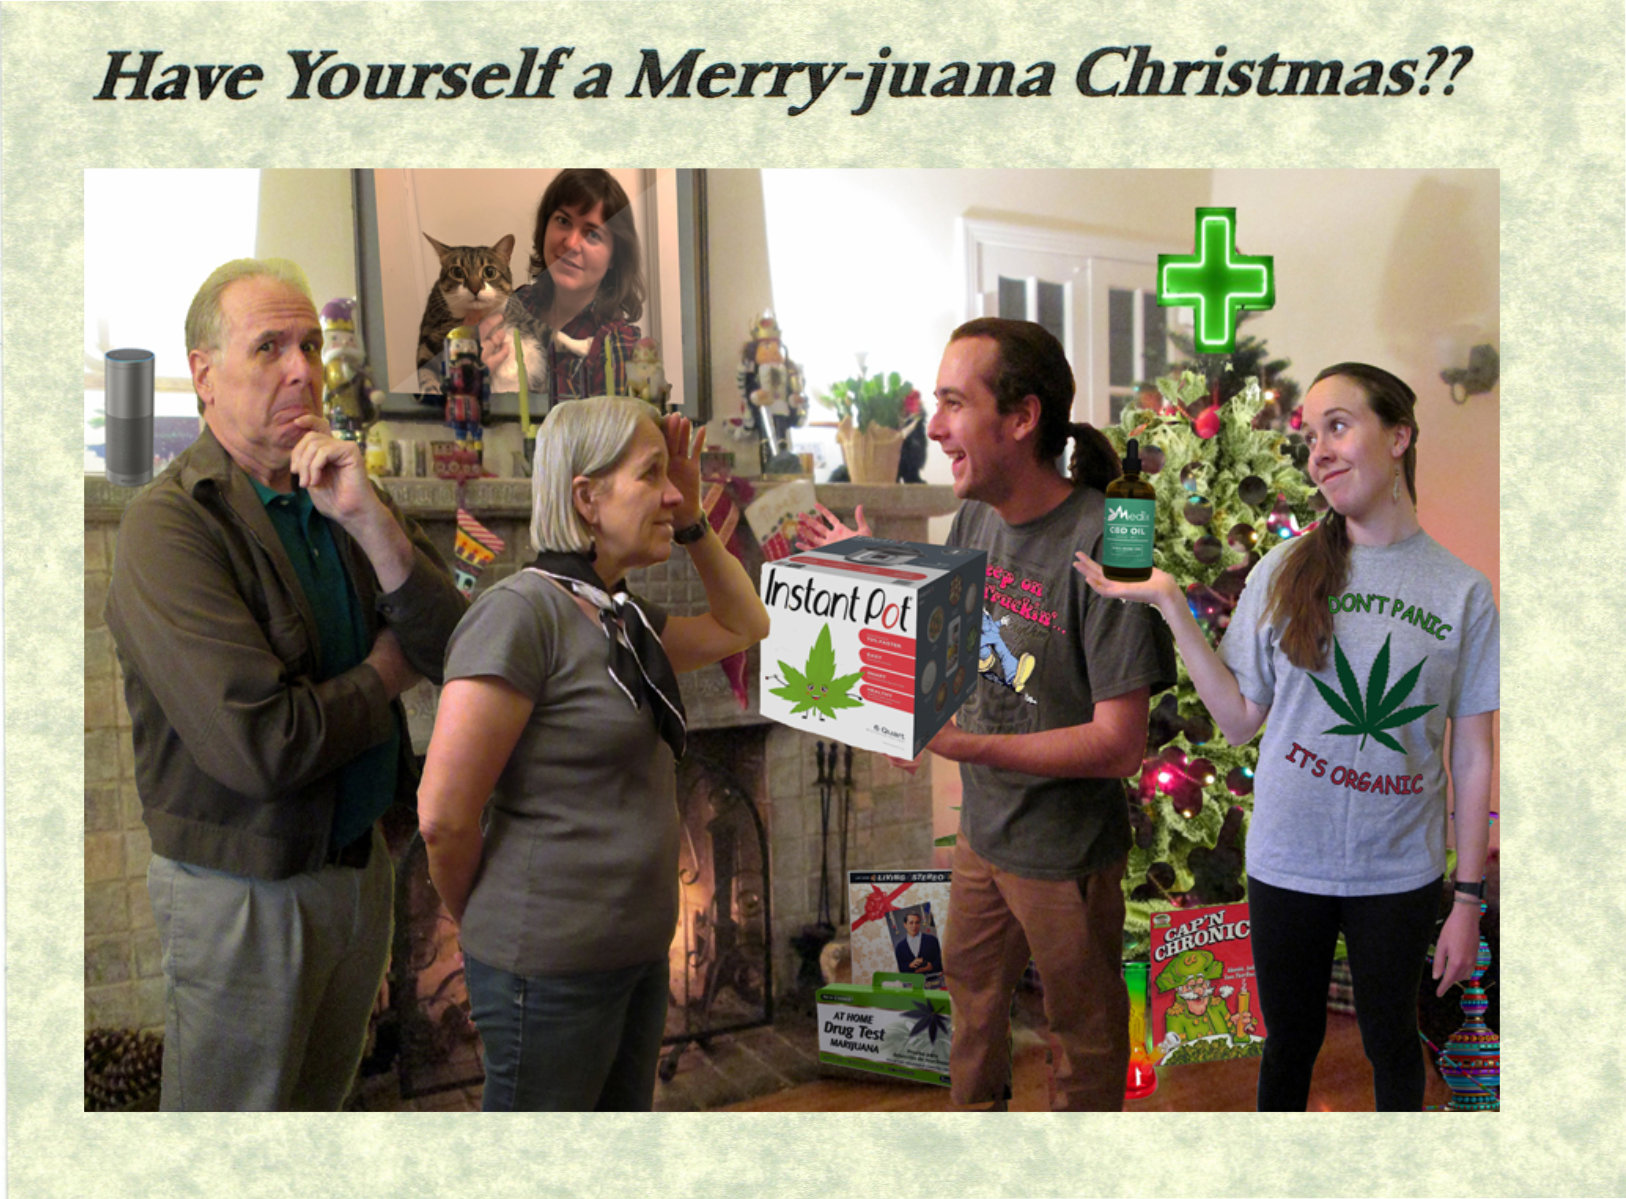 2018 - Have Yourself a Merry-Juana Christmas??